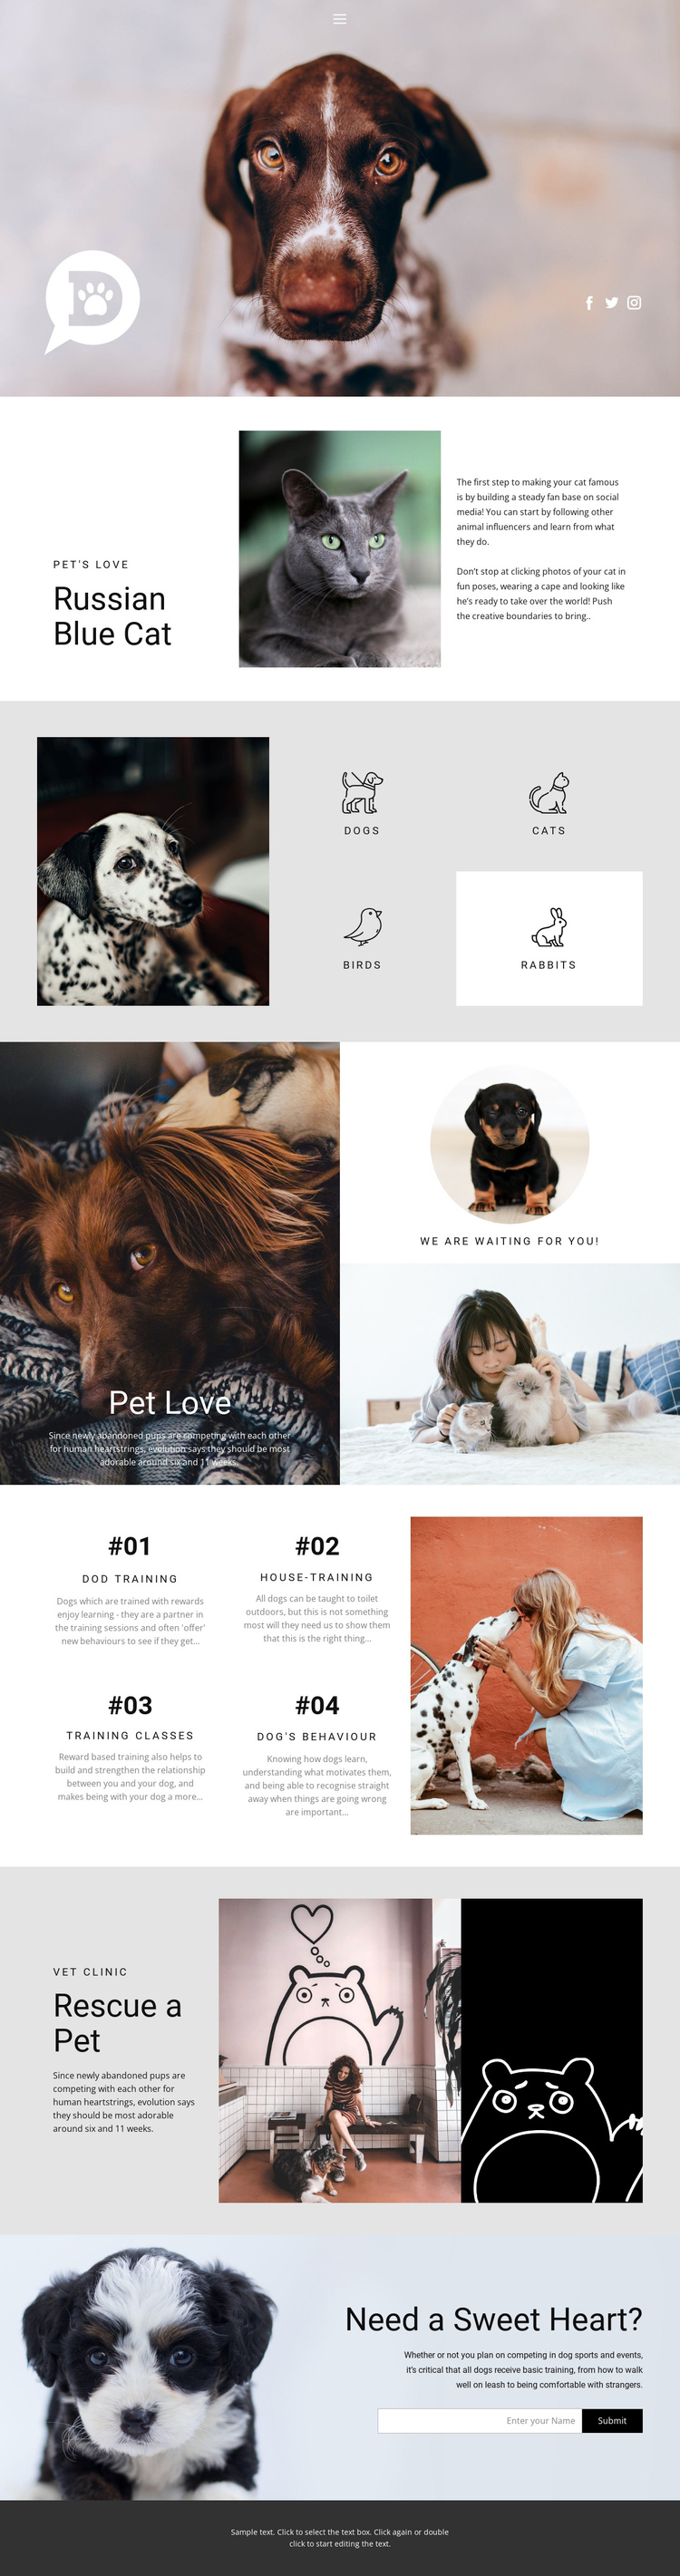 Care for pets and animals Website Builder Software